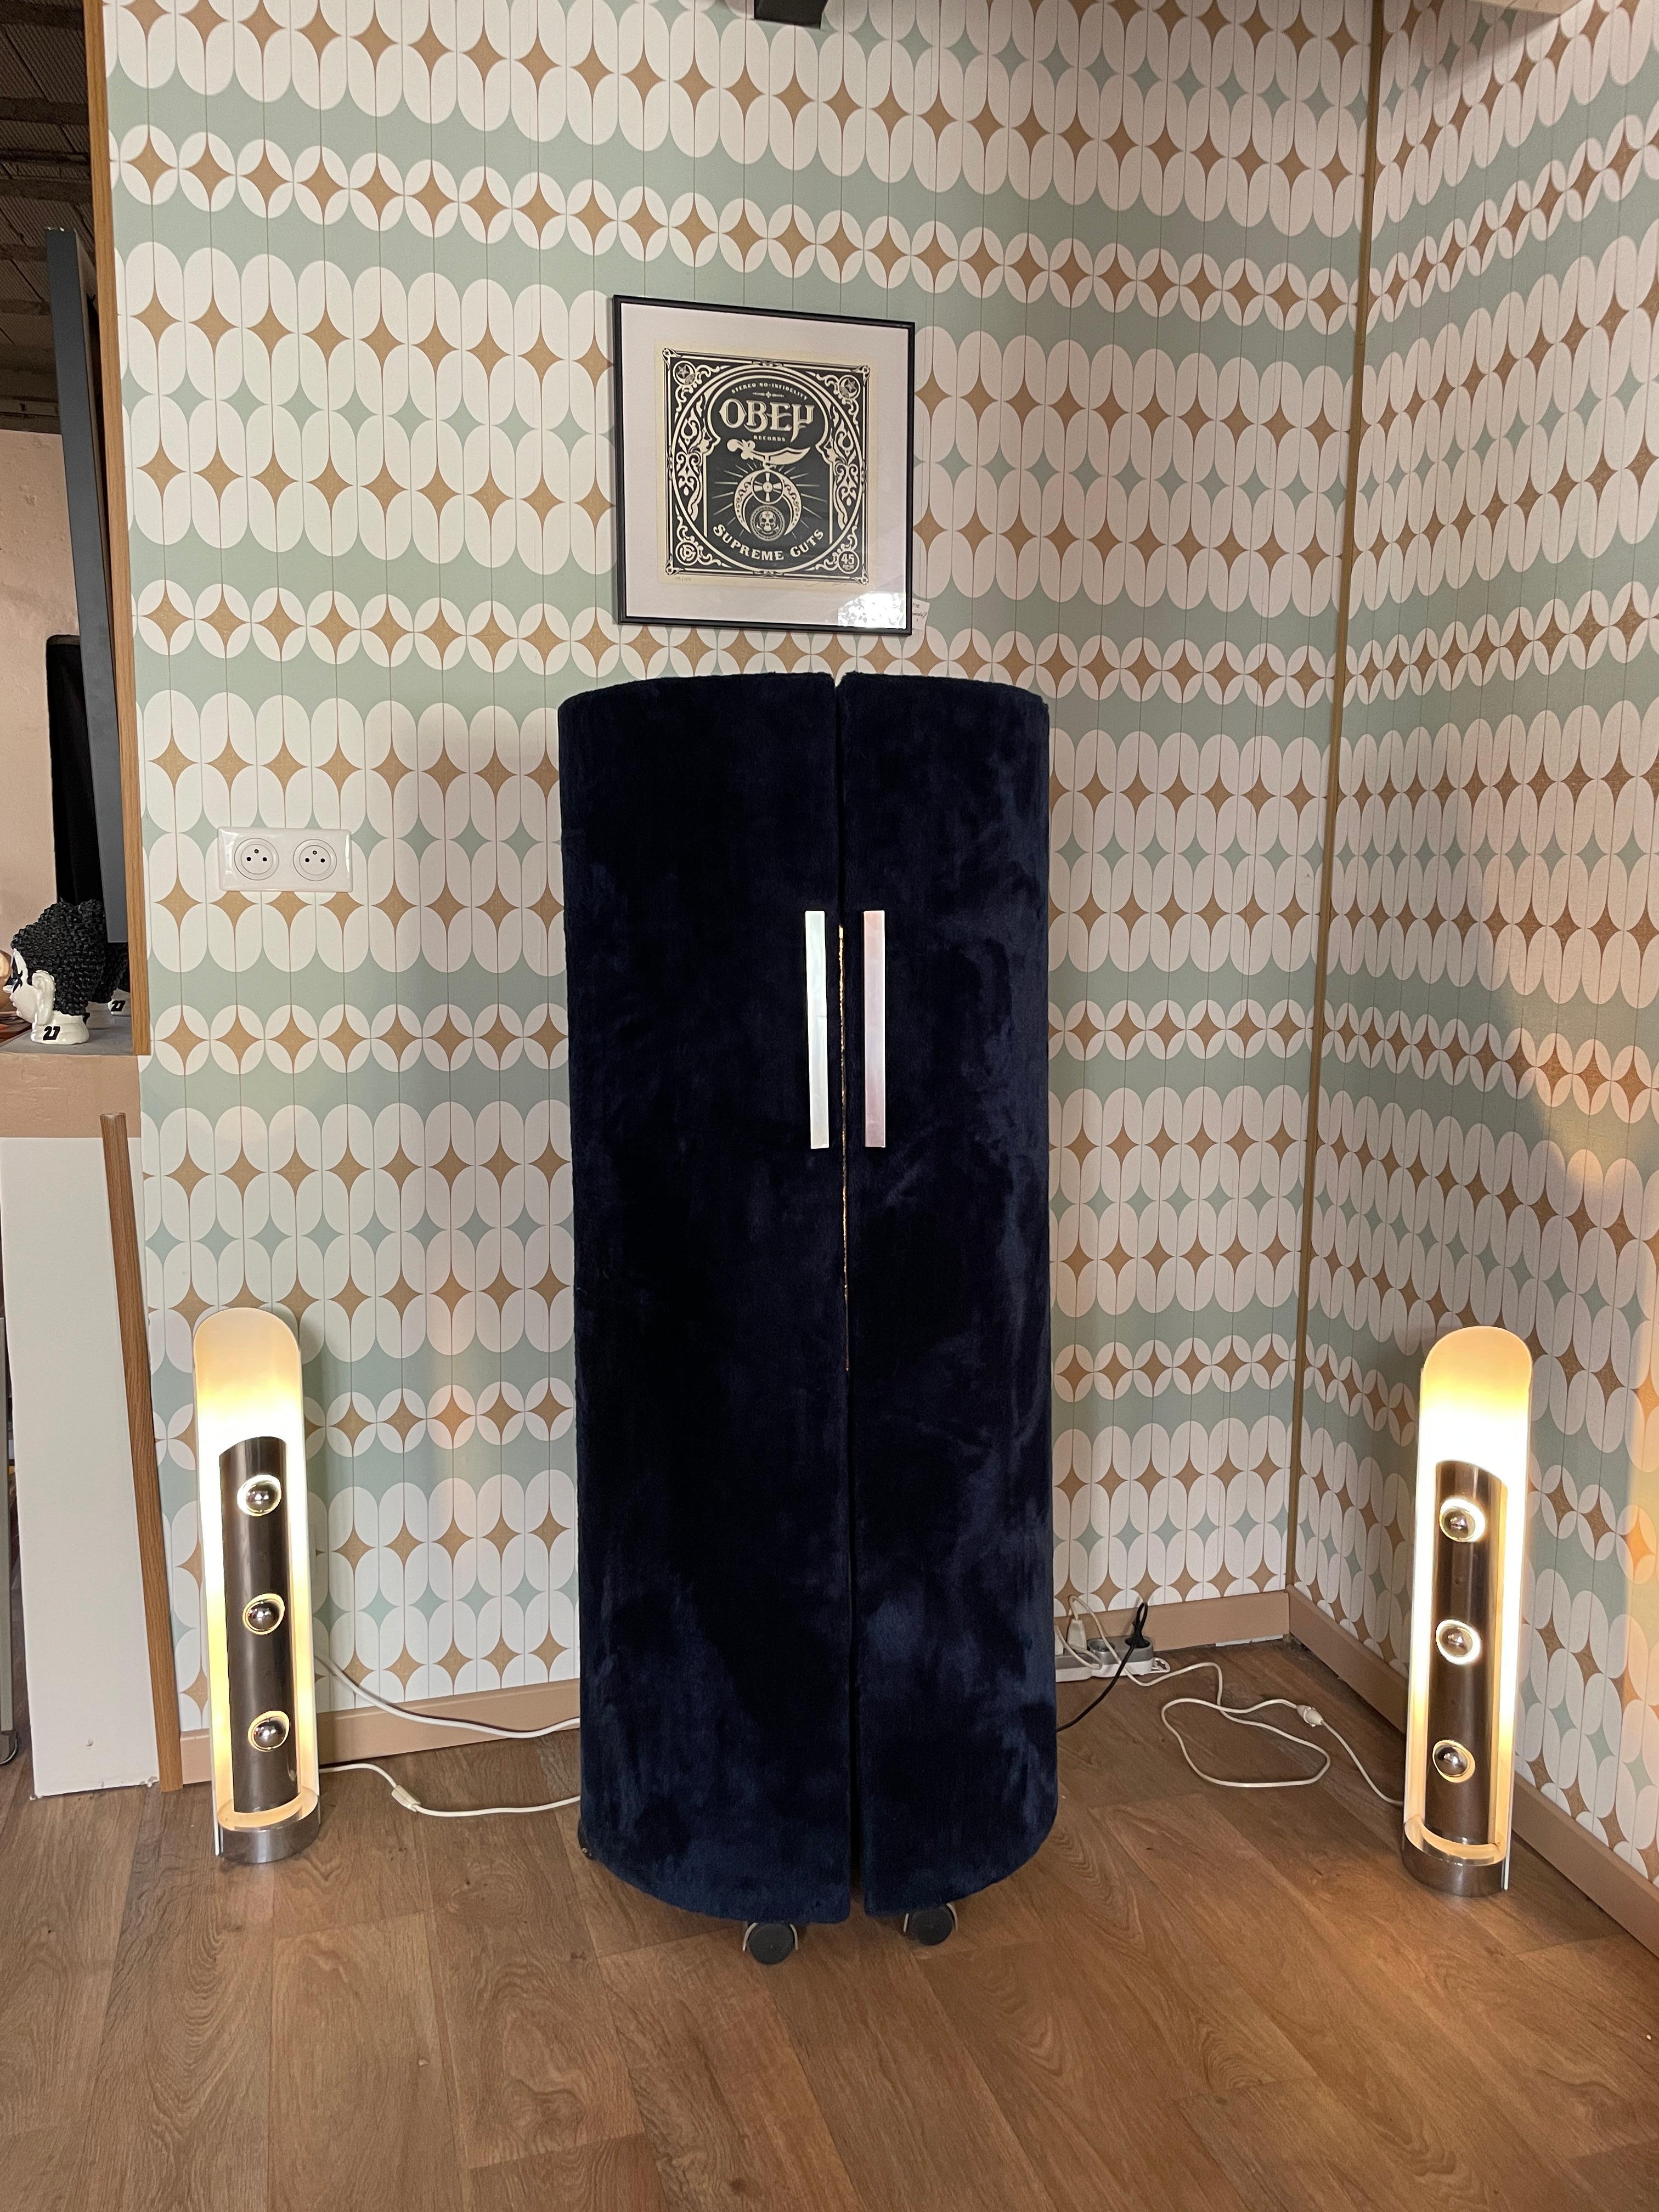 Dressing table - Vanitie 60-70 in fur, on wheel. Integrated stool.
Two lightning system.
Blue.
For an interior pop, space age and vintage.
In the style of Willy Rizzo, italian designer.
In the style of Willy Rizzo, Knoll, Ico Parisi, Romeo Rega,